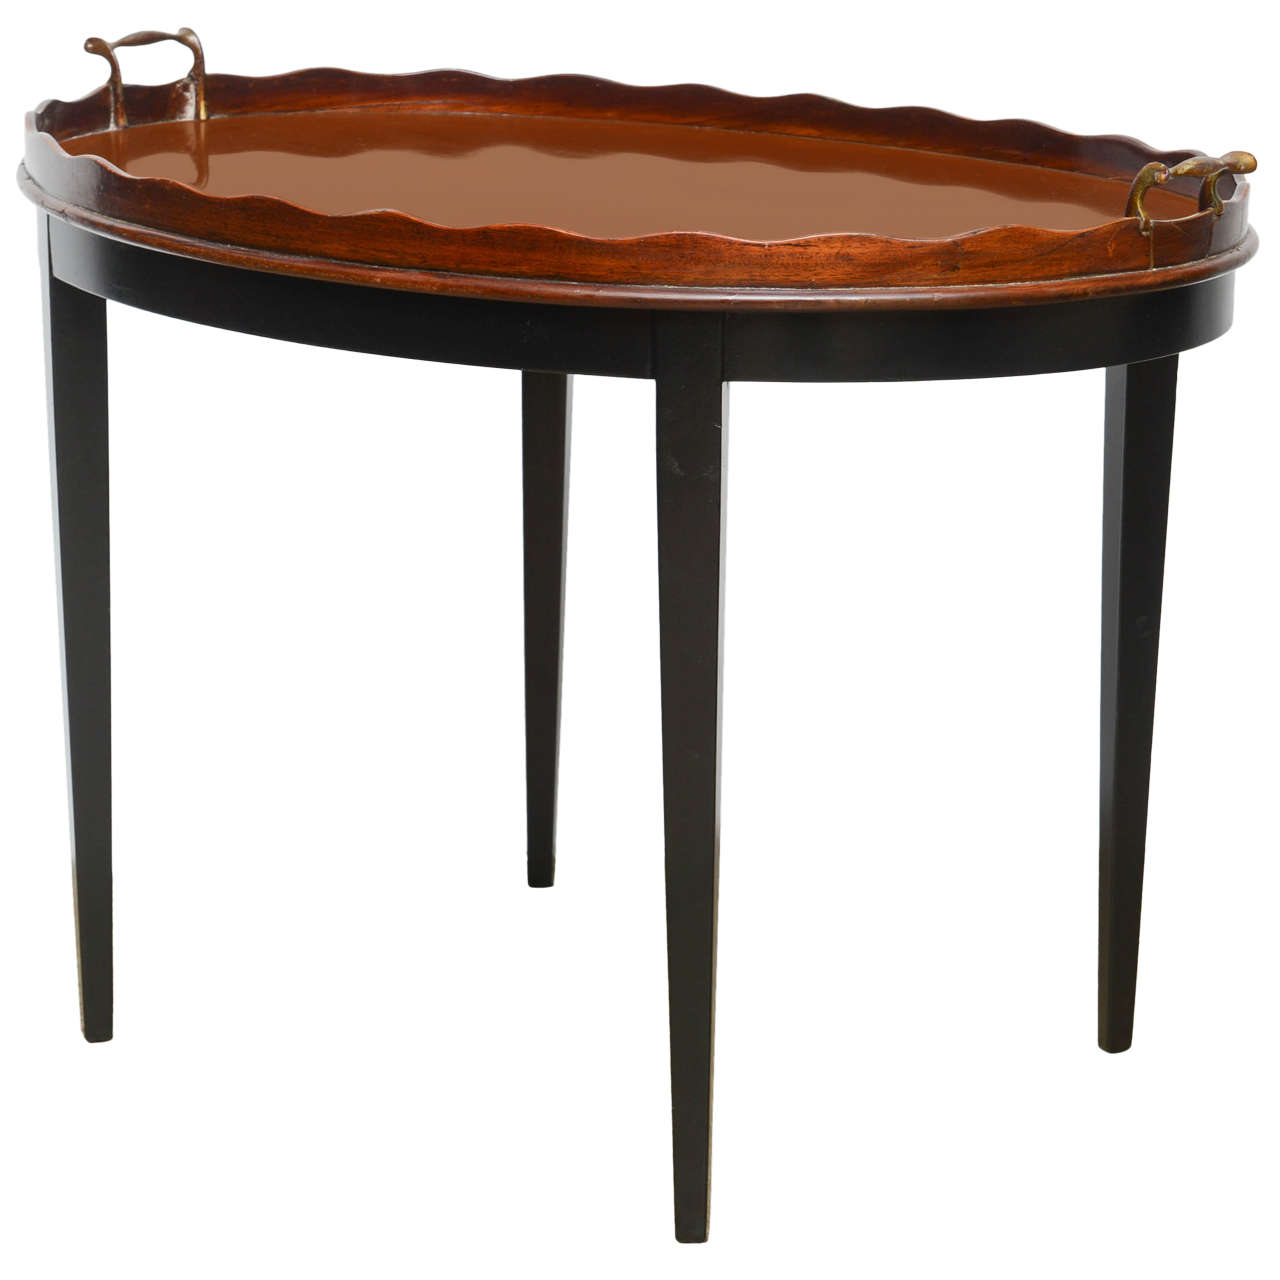 Regency Style English CocktailTray Top Table